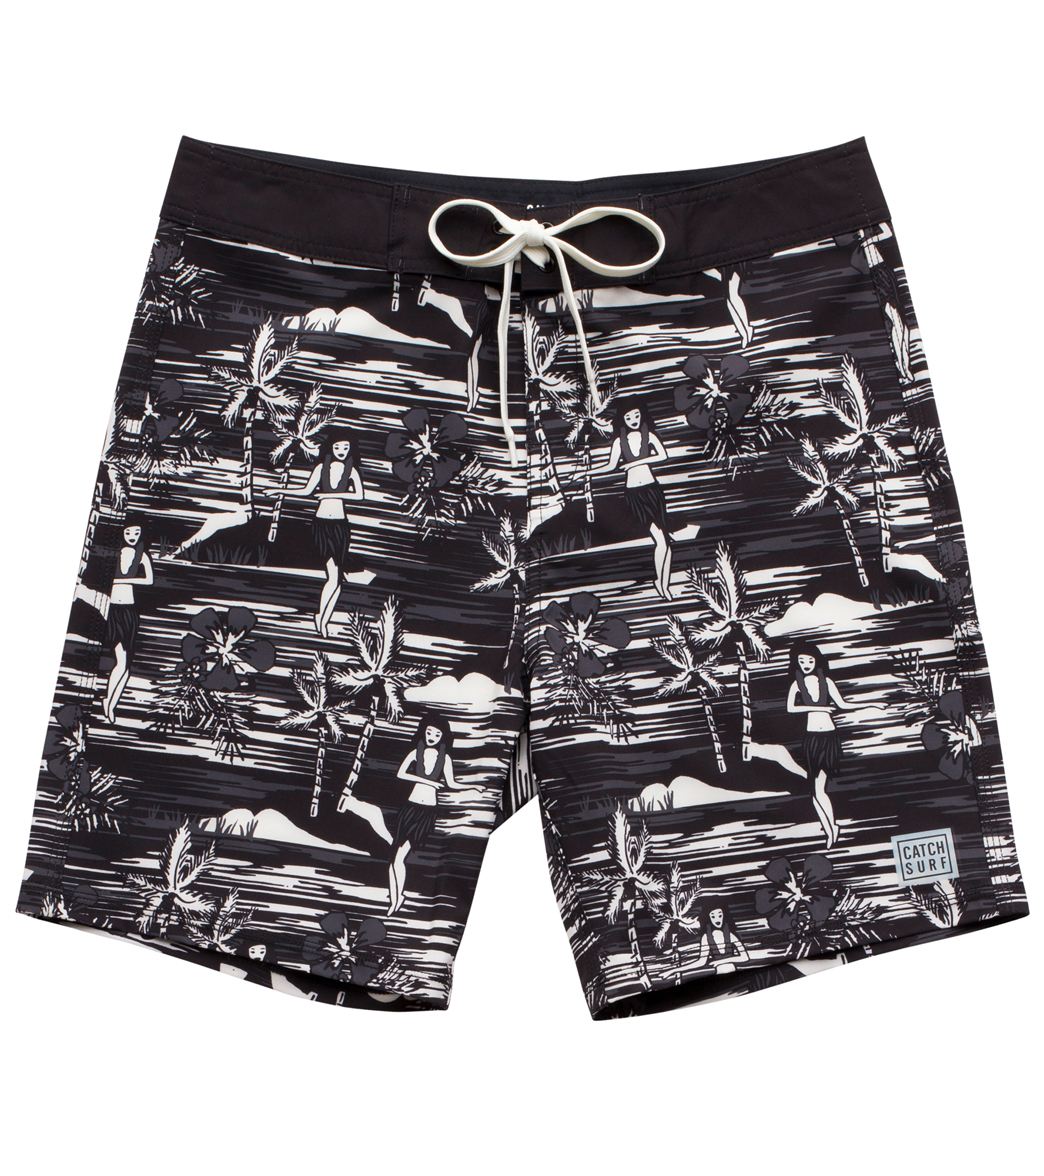 Catch Surf Men's All Day Trunk 18 Inch - Slate 28 - Swimoutlet.com